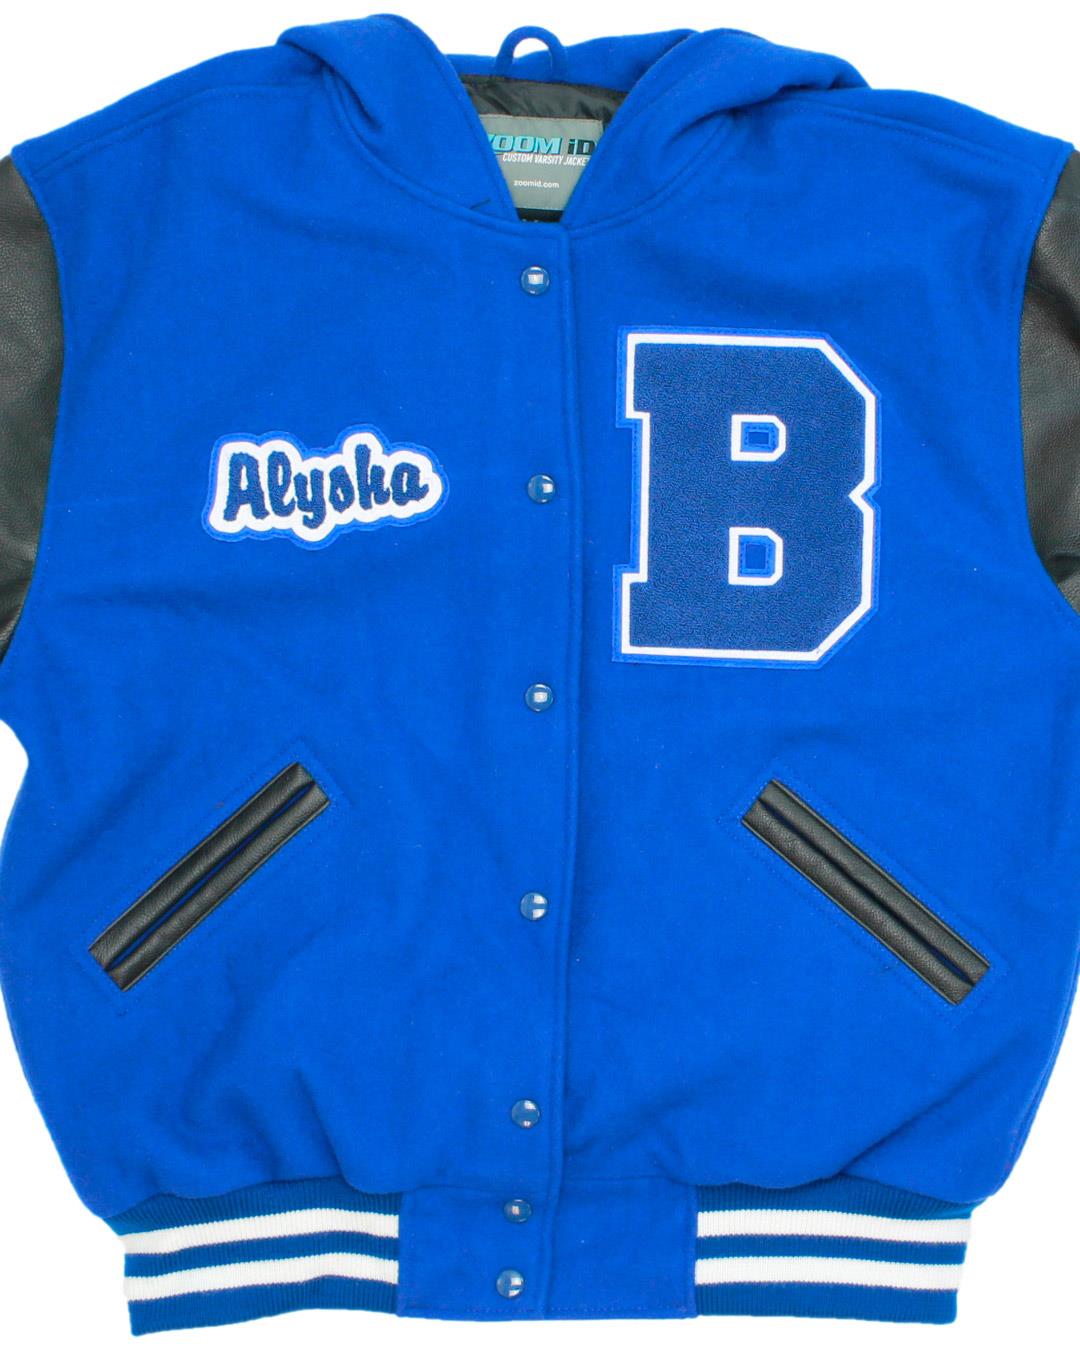 Beaumont High School Cougars Letter Jacket, Beaumont, CA - Front